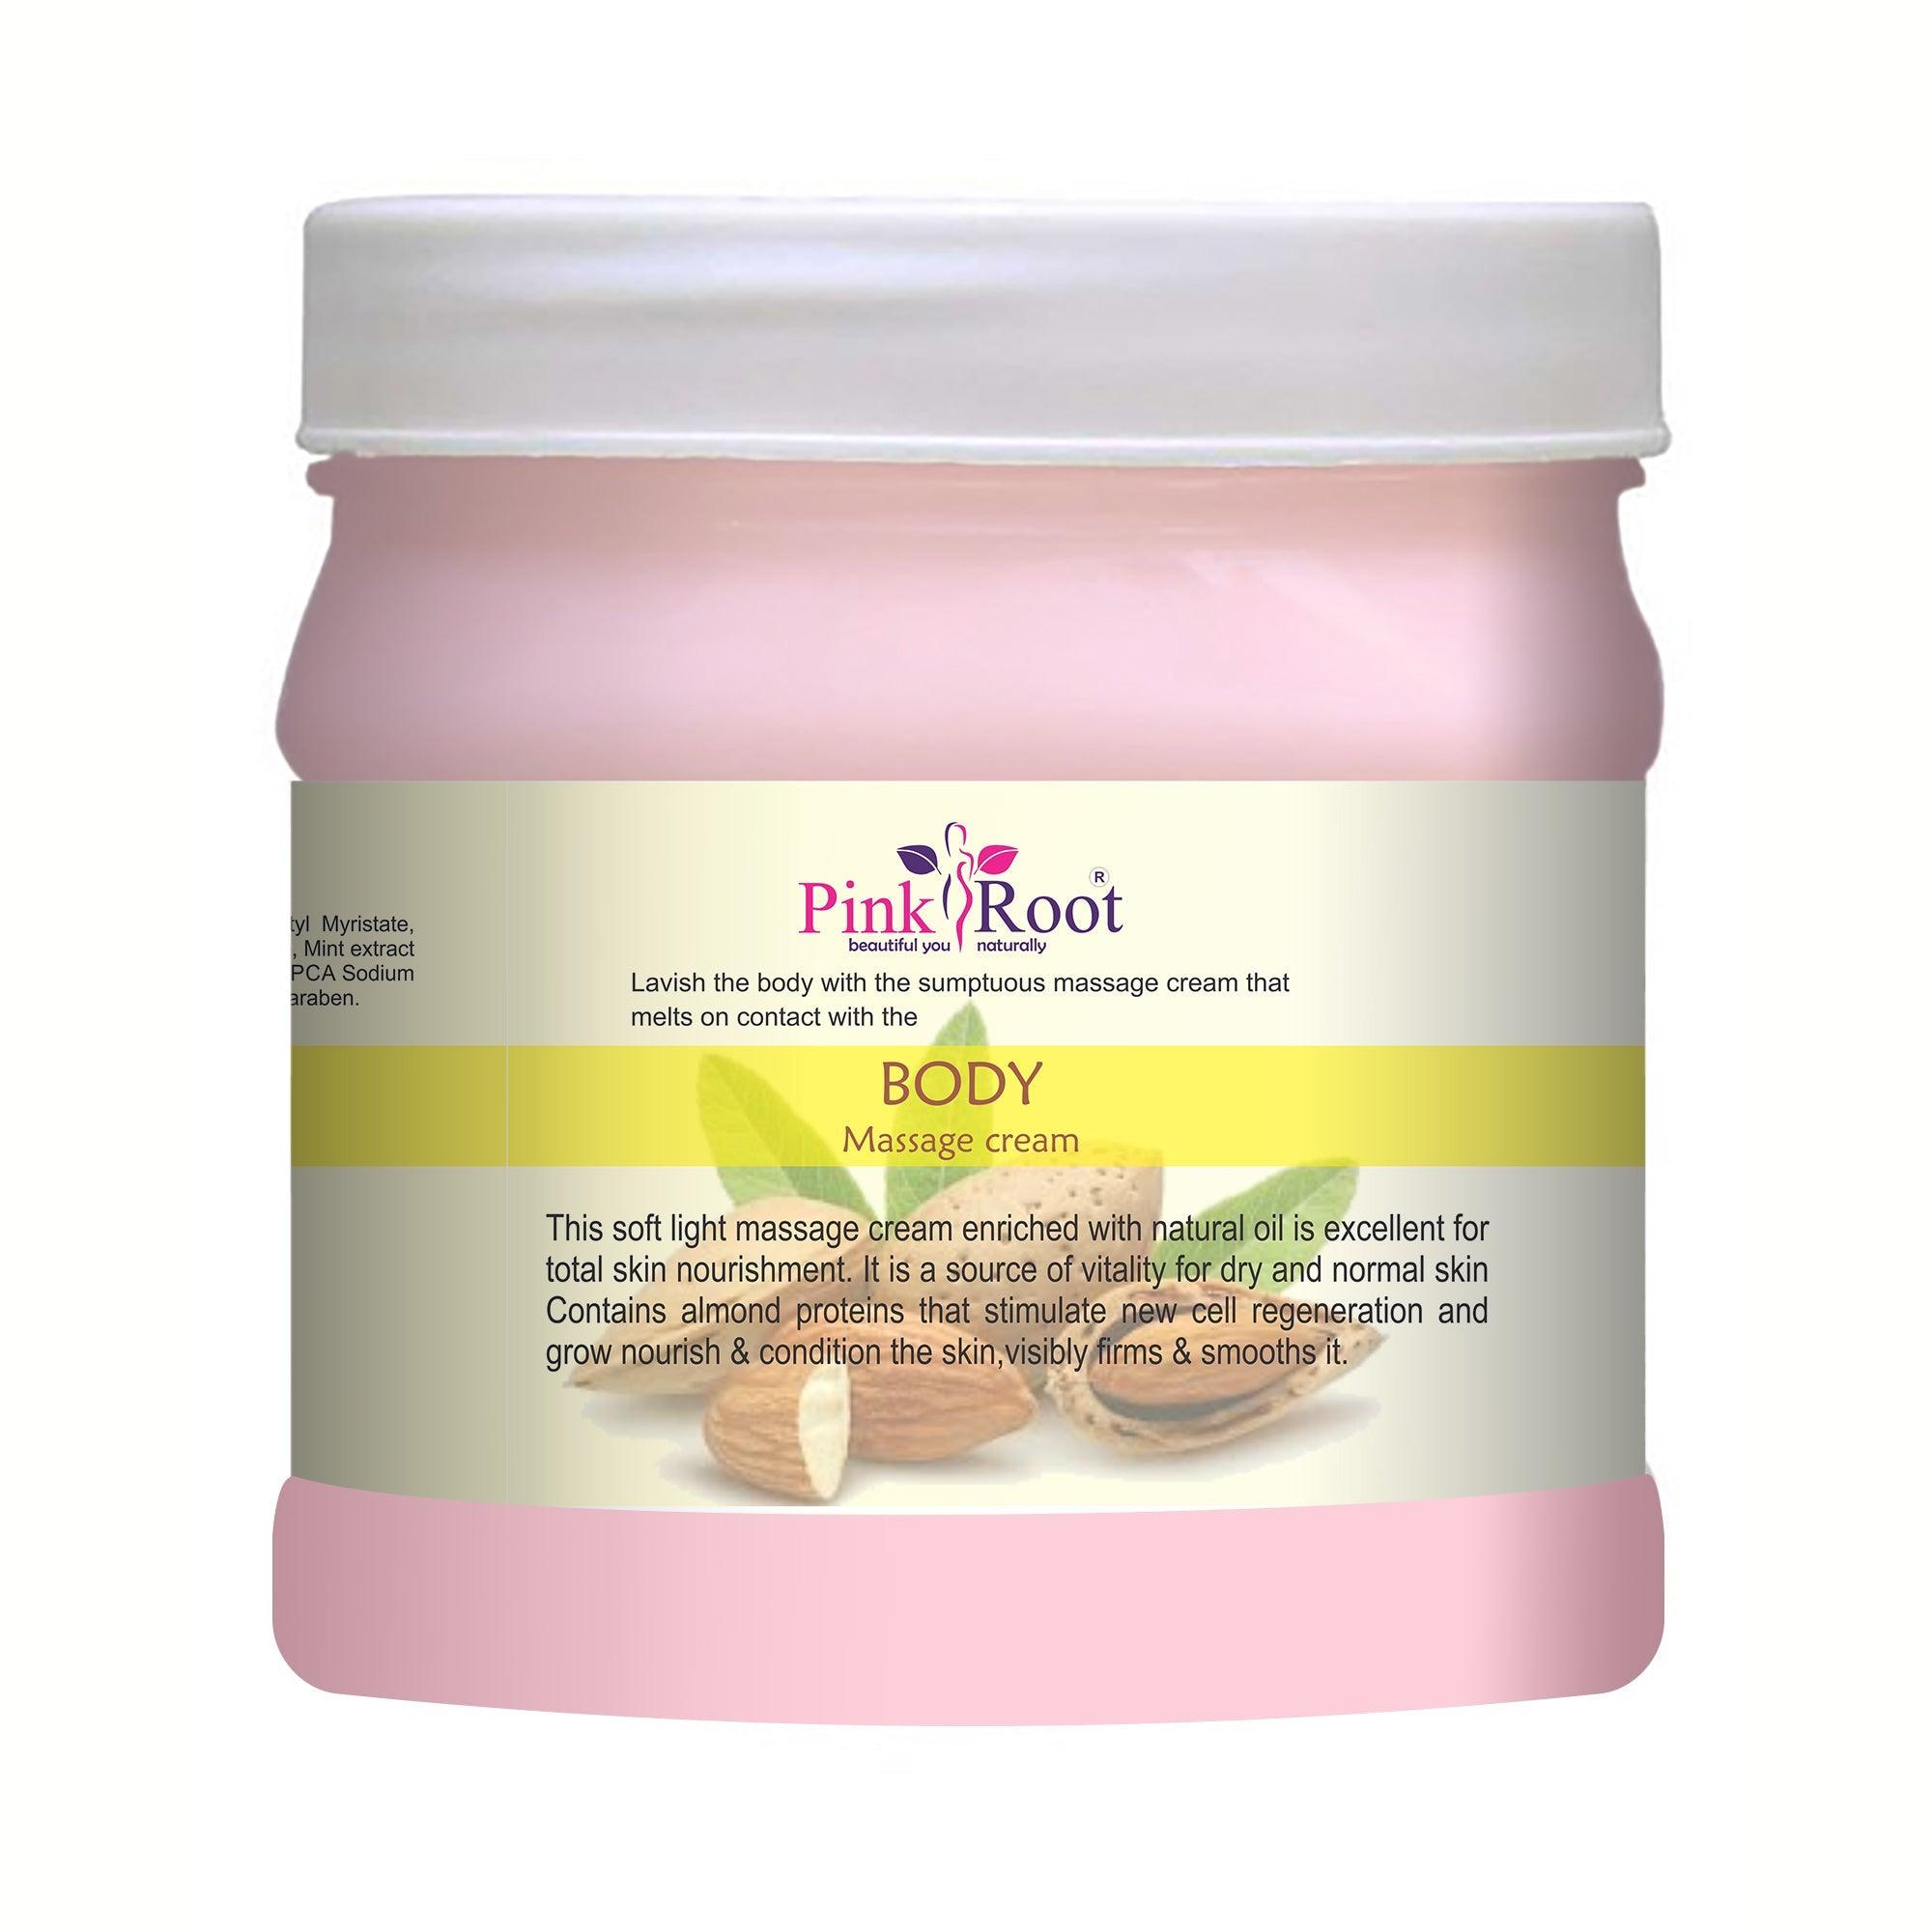 Body Massage Cream Enriched with Almond ,Olive, Carrot seed oil 500ml - Pink Root